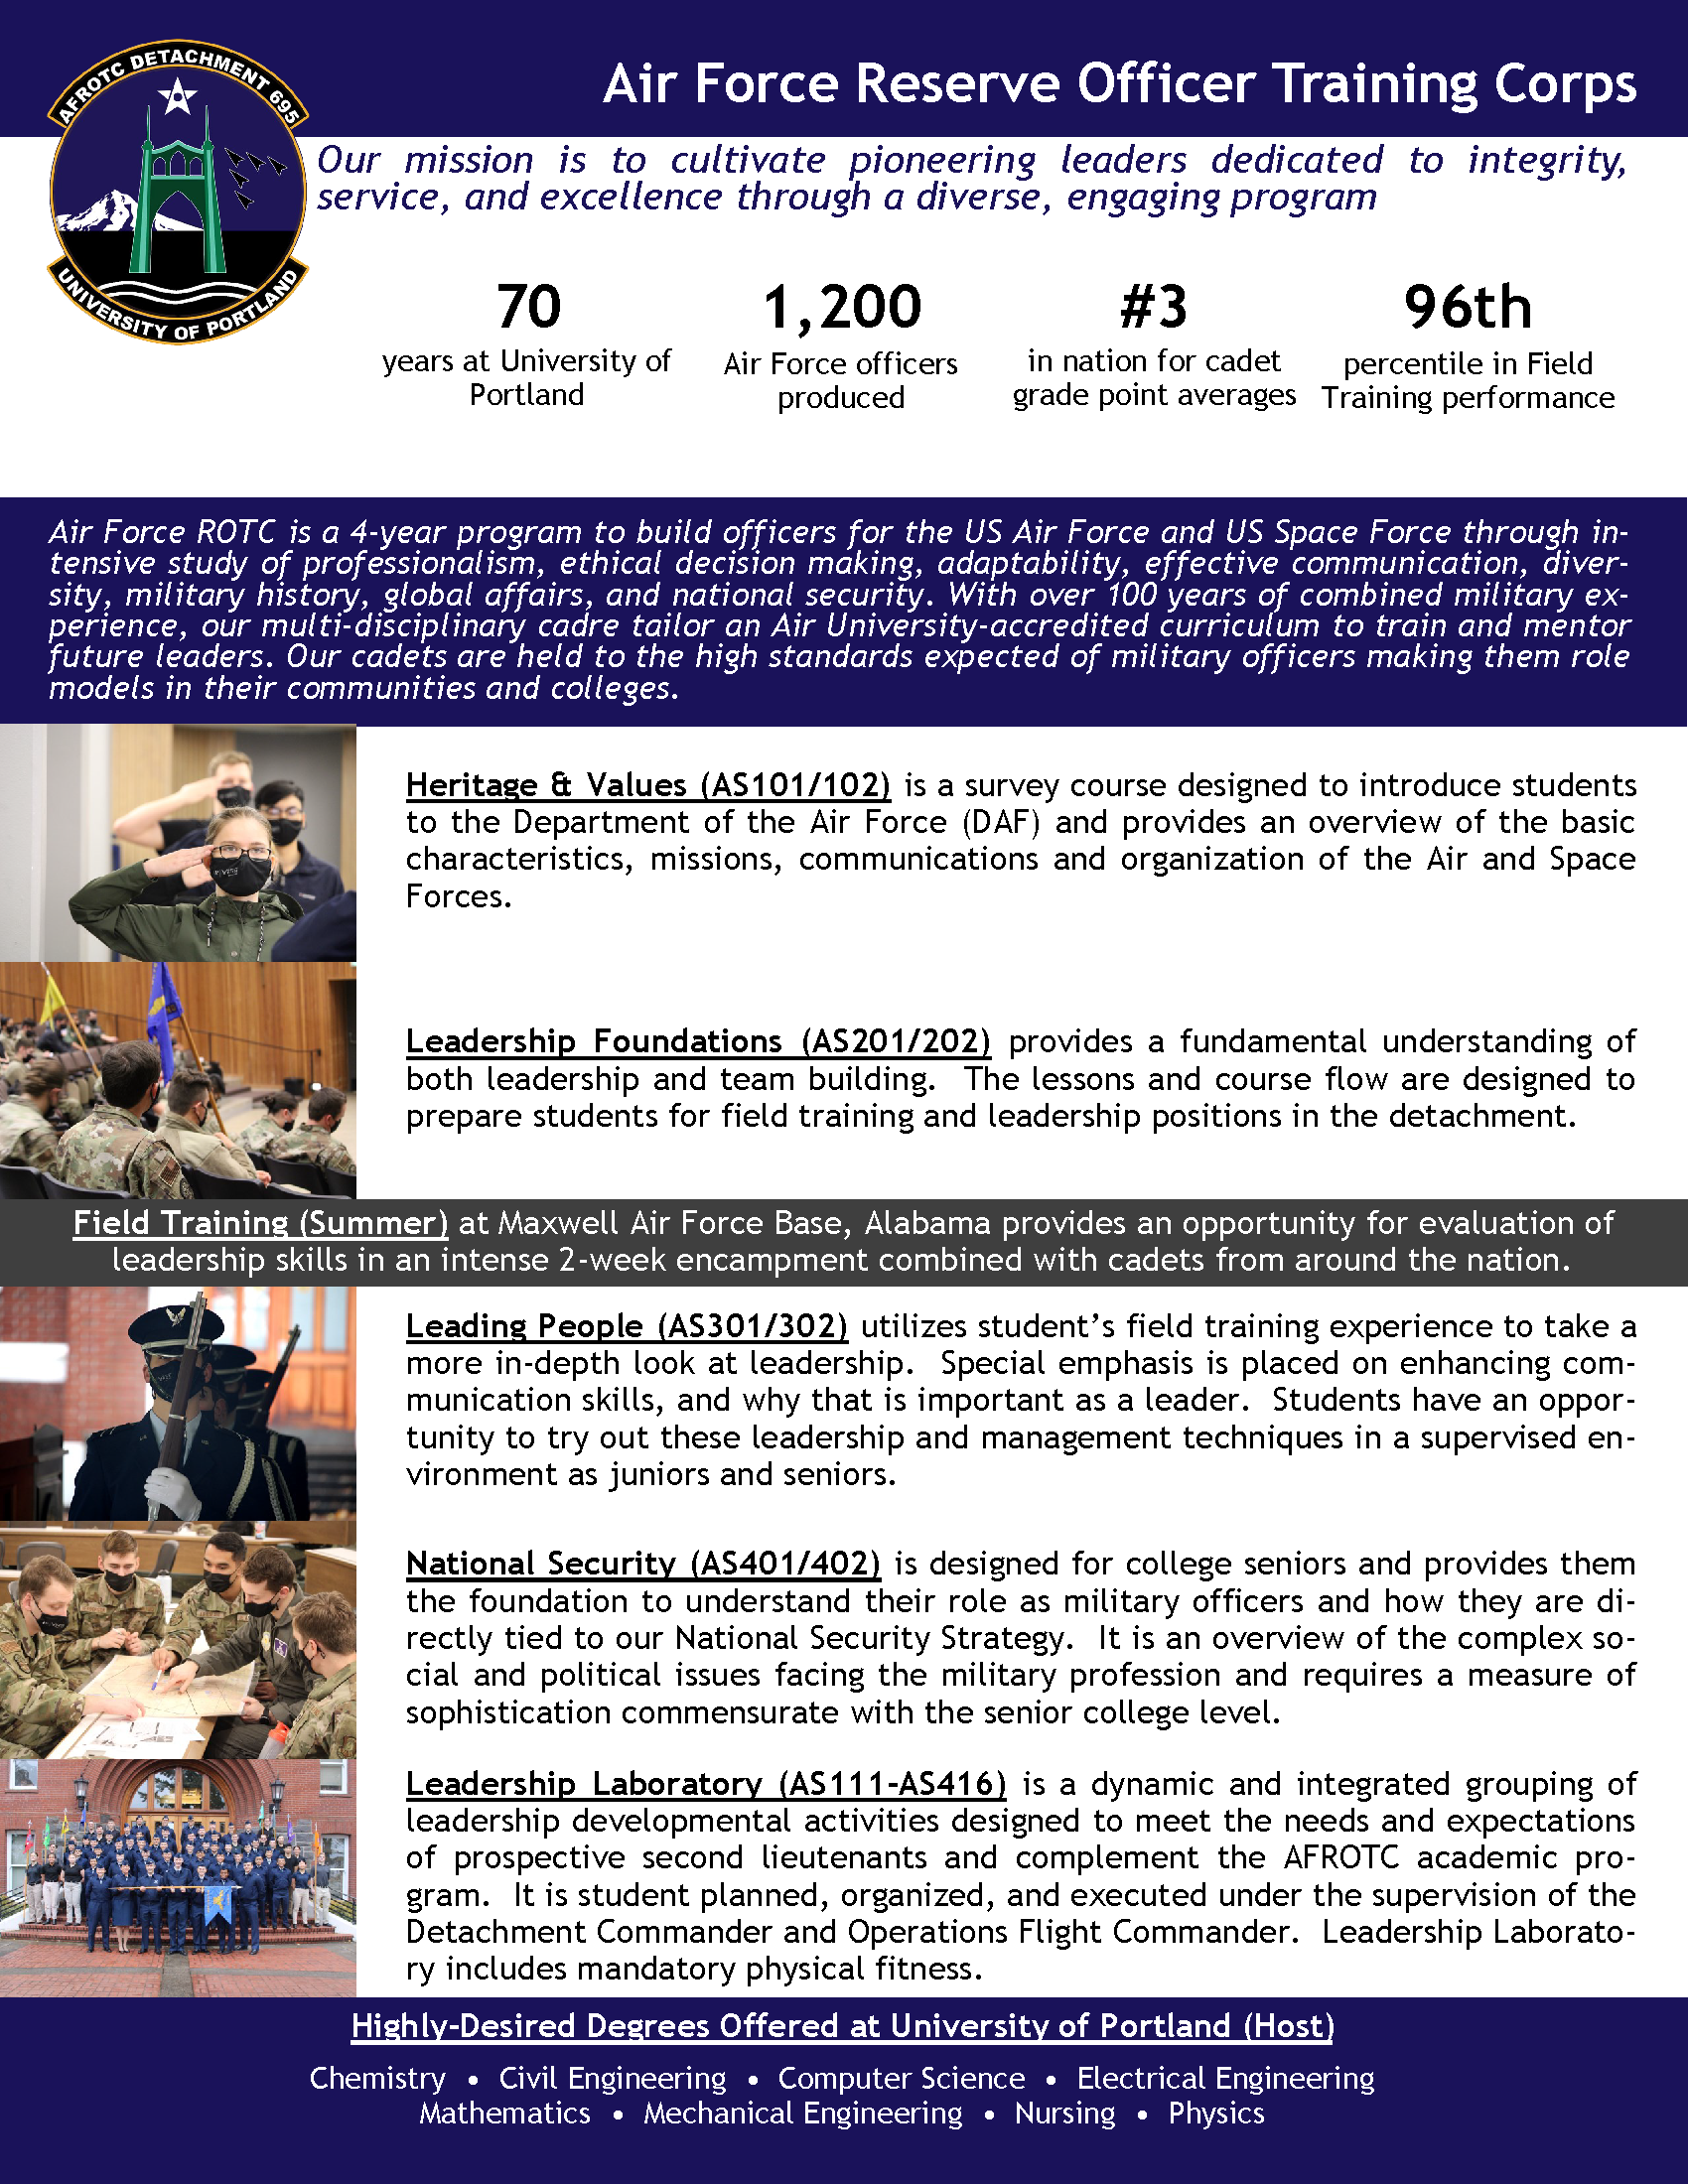 afrotc-1-pager_page_1.png